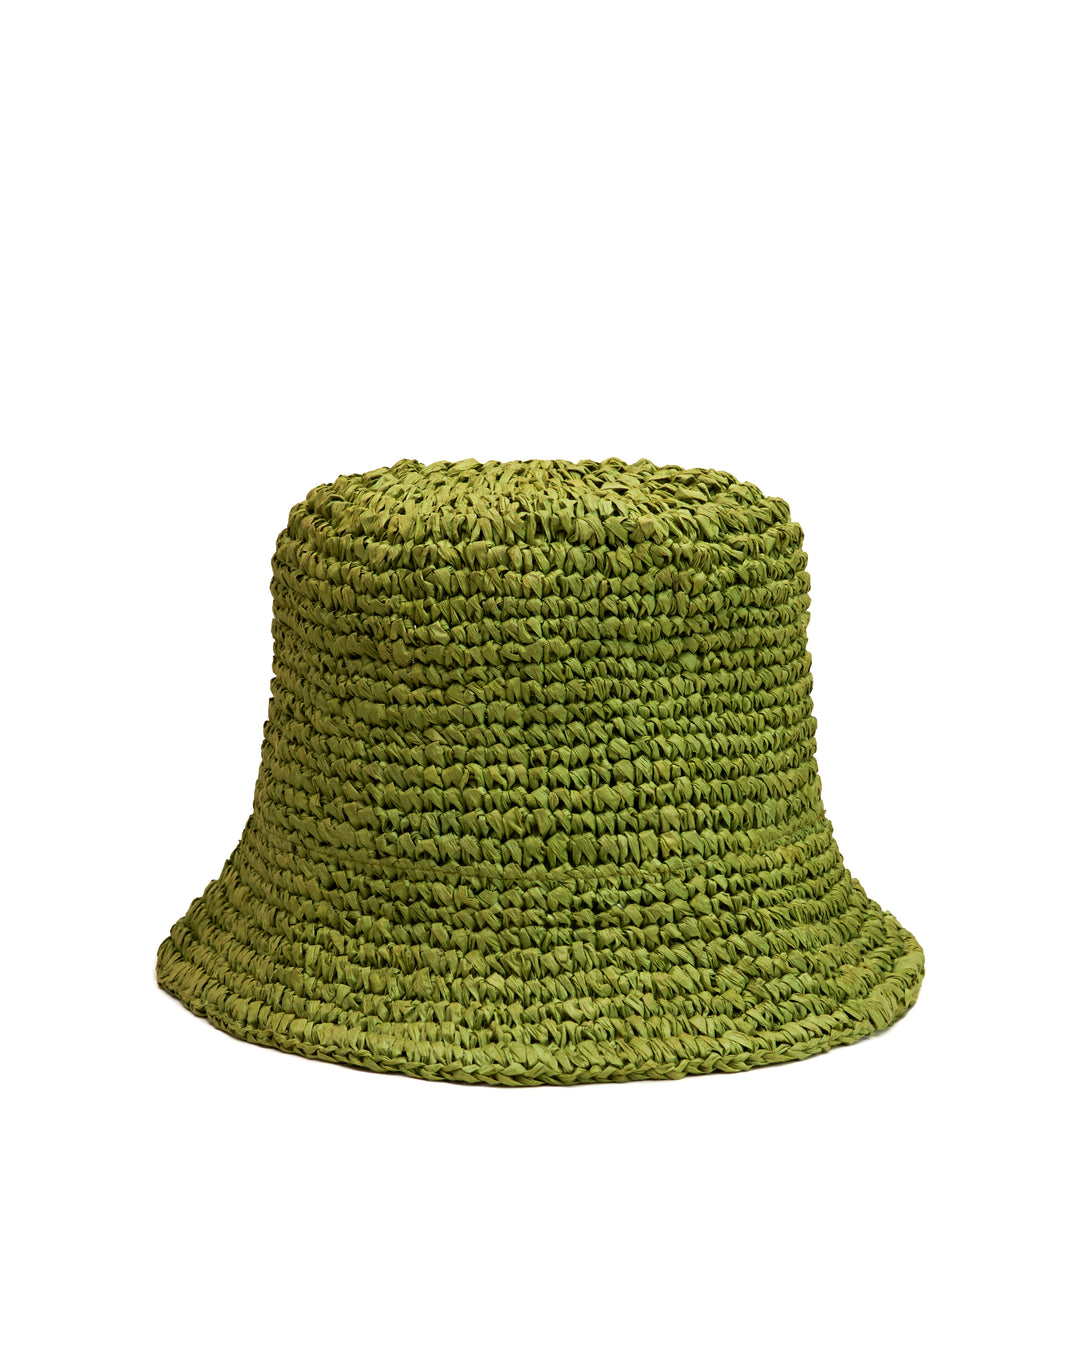 A green crocheted bucket hat, the Amabile Rafia Hat by Dandy Del Mar, isolated on a white background.